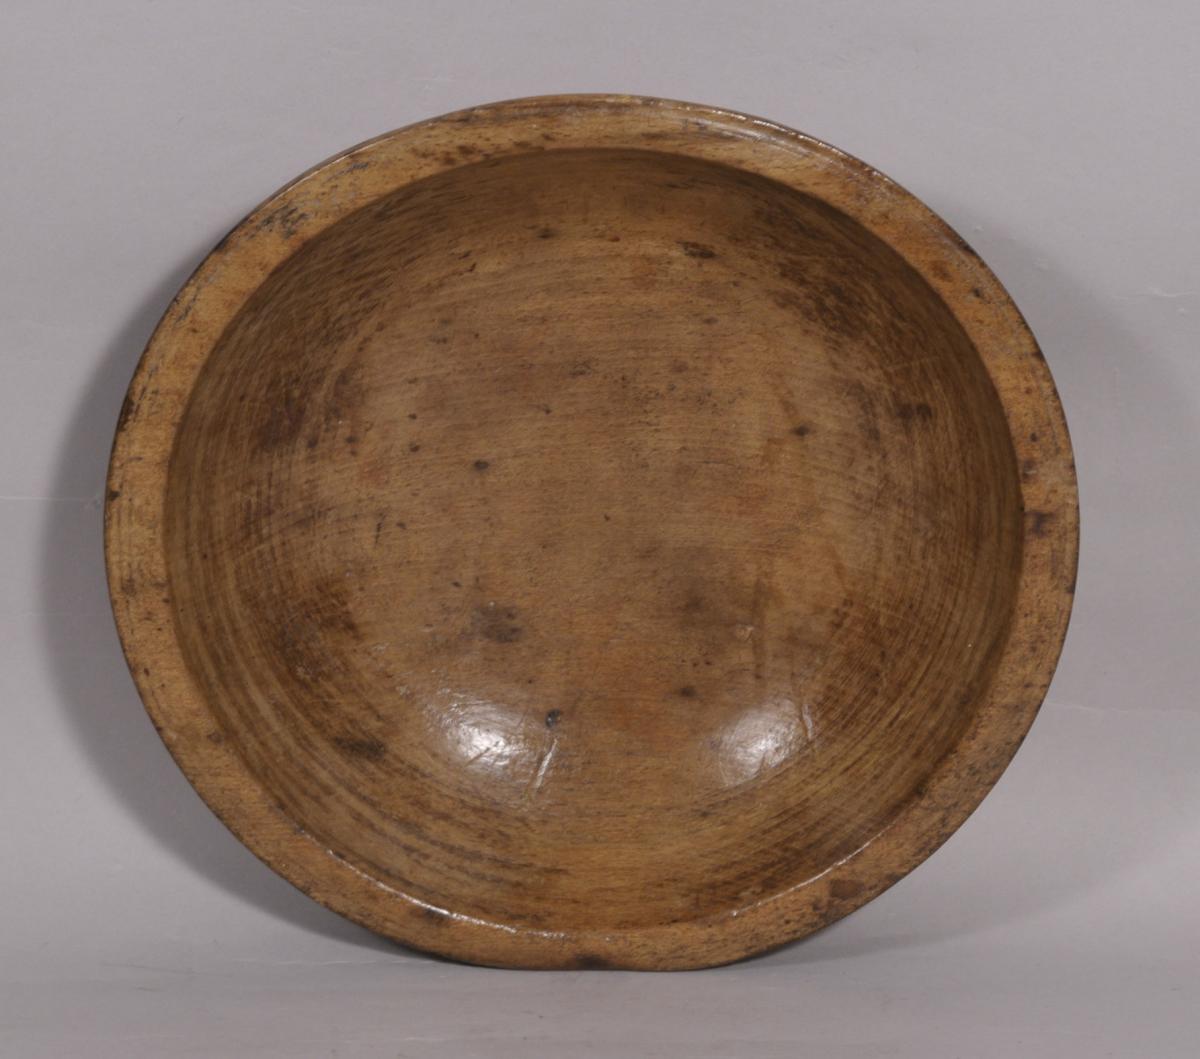 S/3979 Antique Treen 19th Century Sycamore Food Bowl